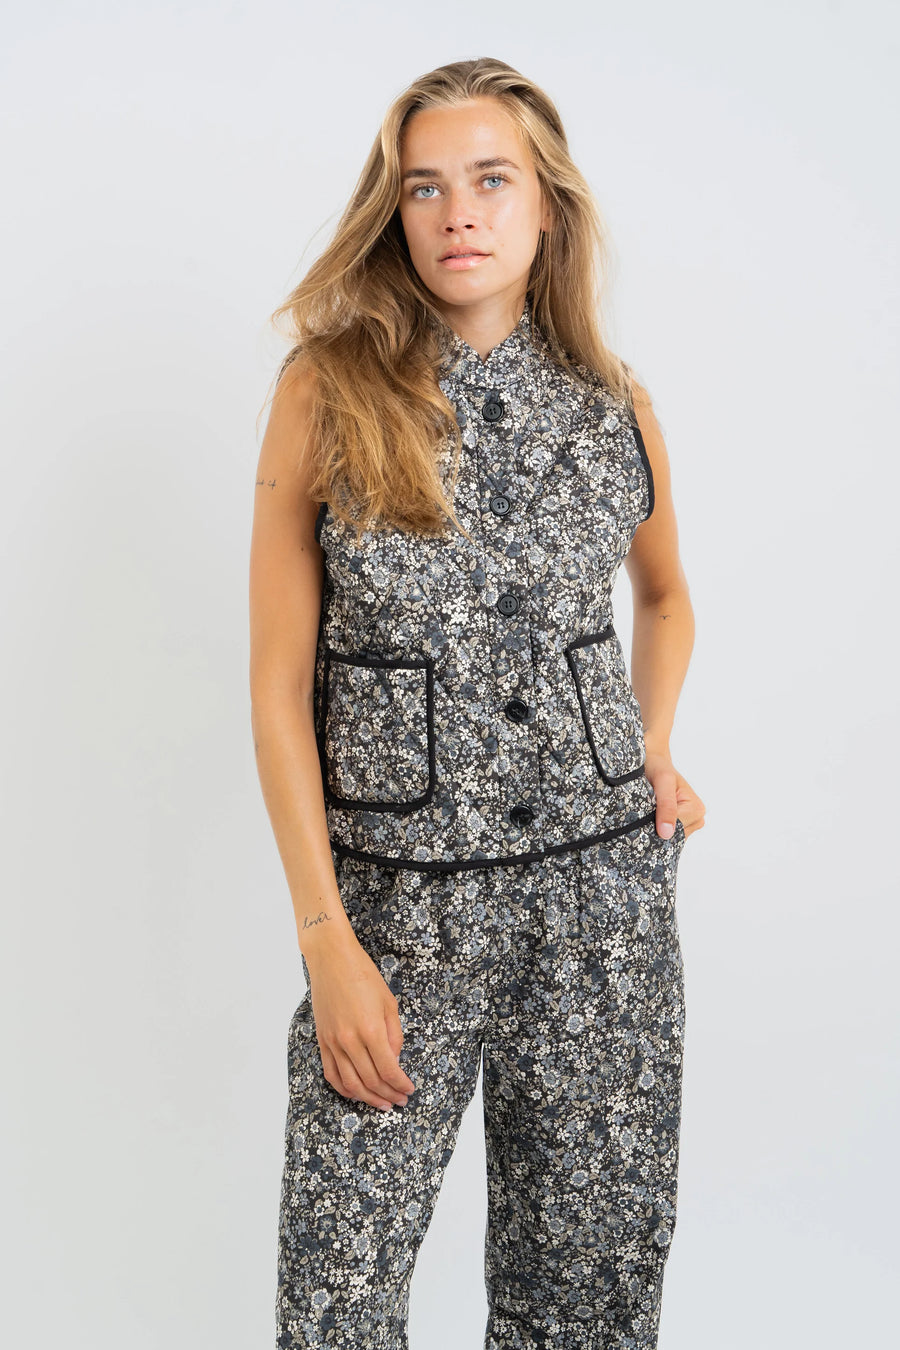 Lollys Laundry Cairo Waistcoat Gillet Quilted Padded Floral